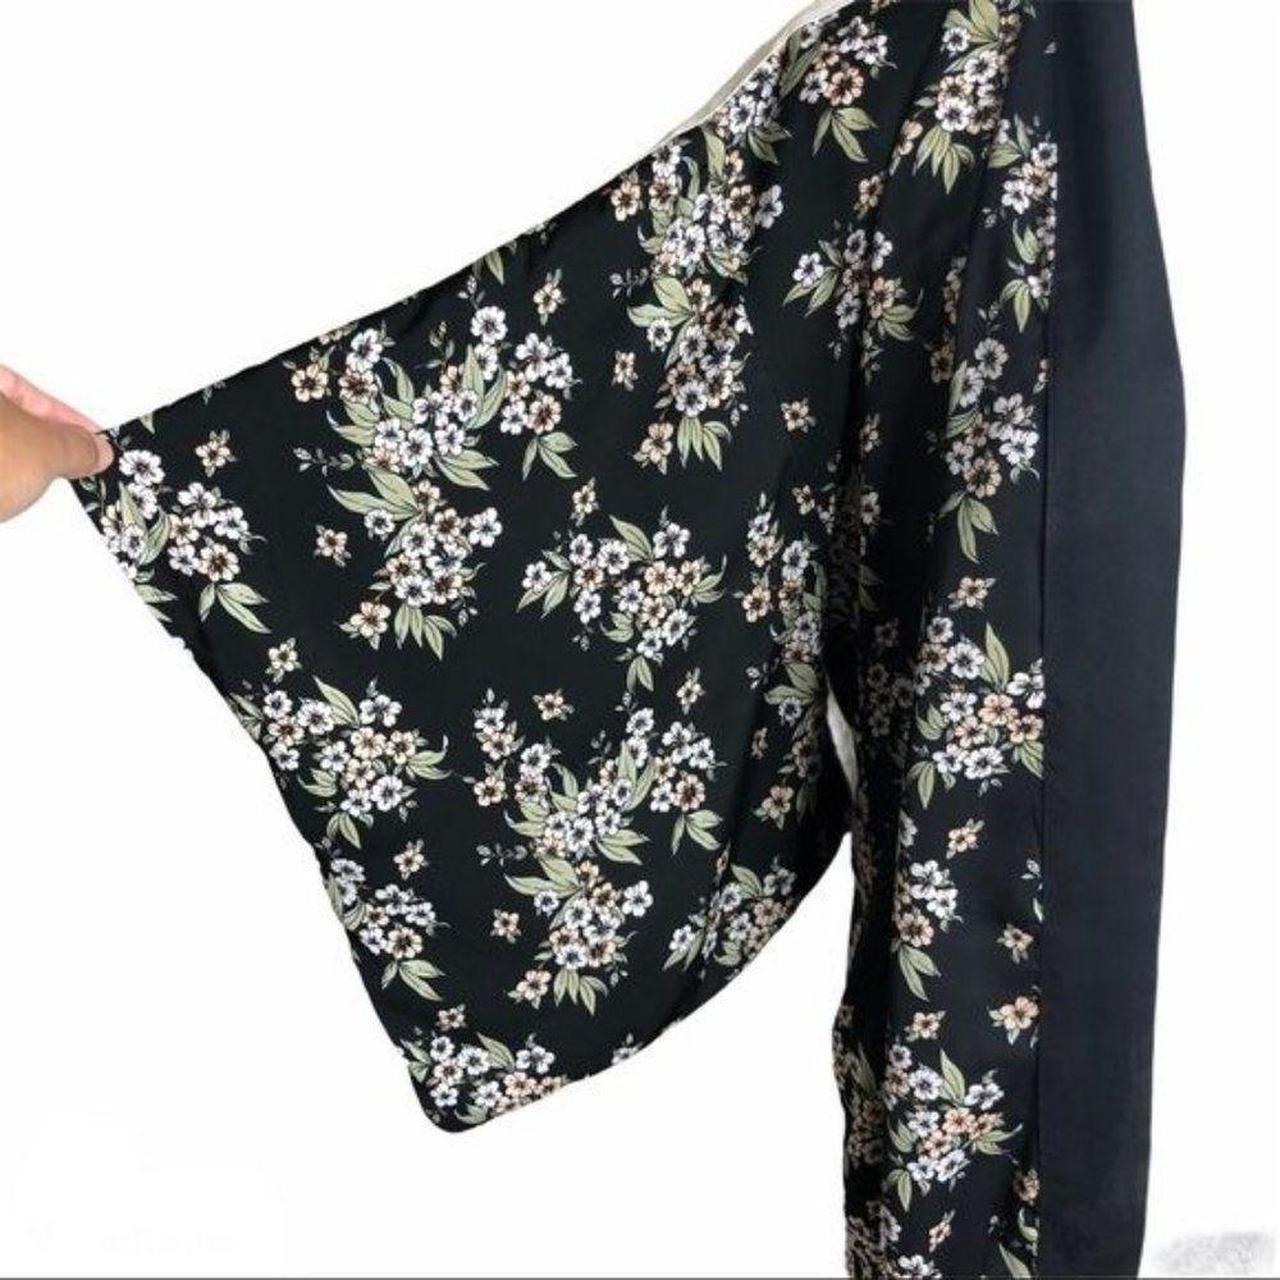 Product Image 3 - Forever 21 Floral Kimono Small

Pre